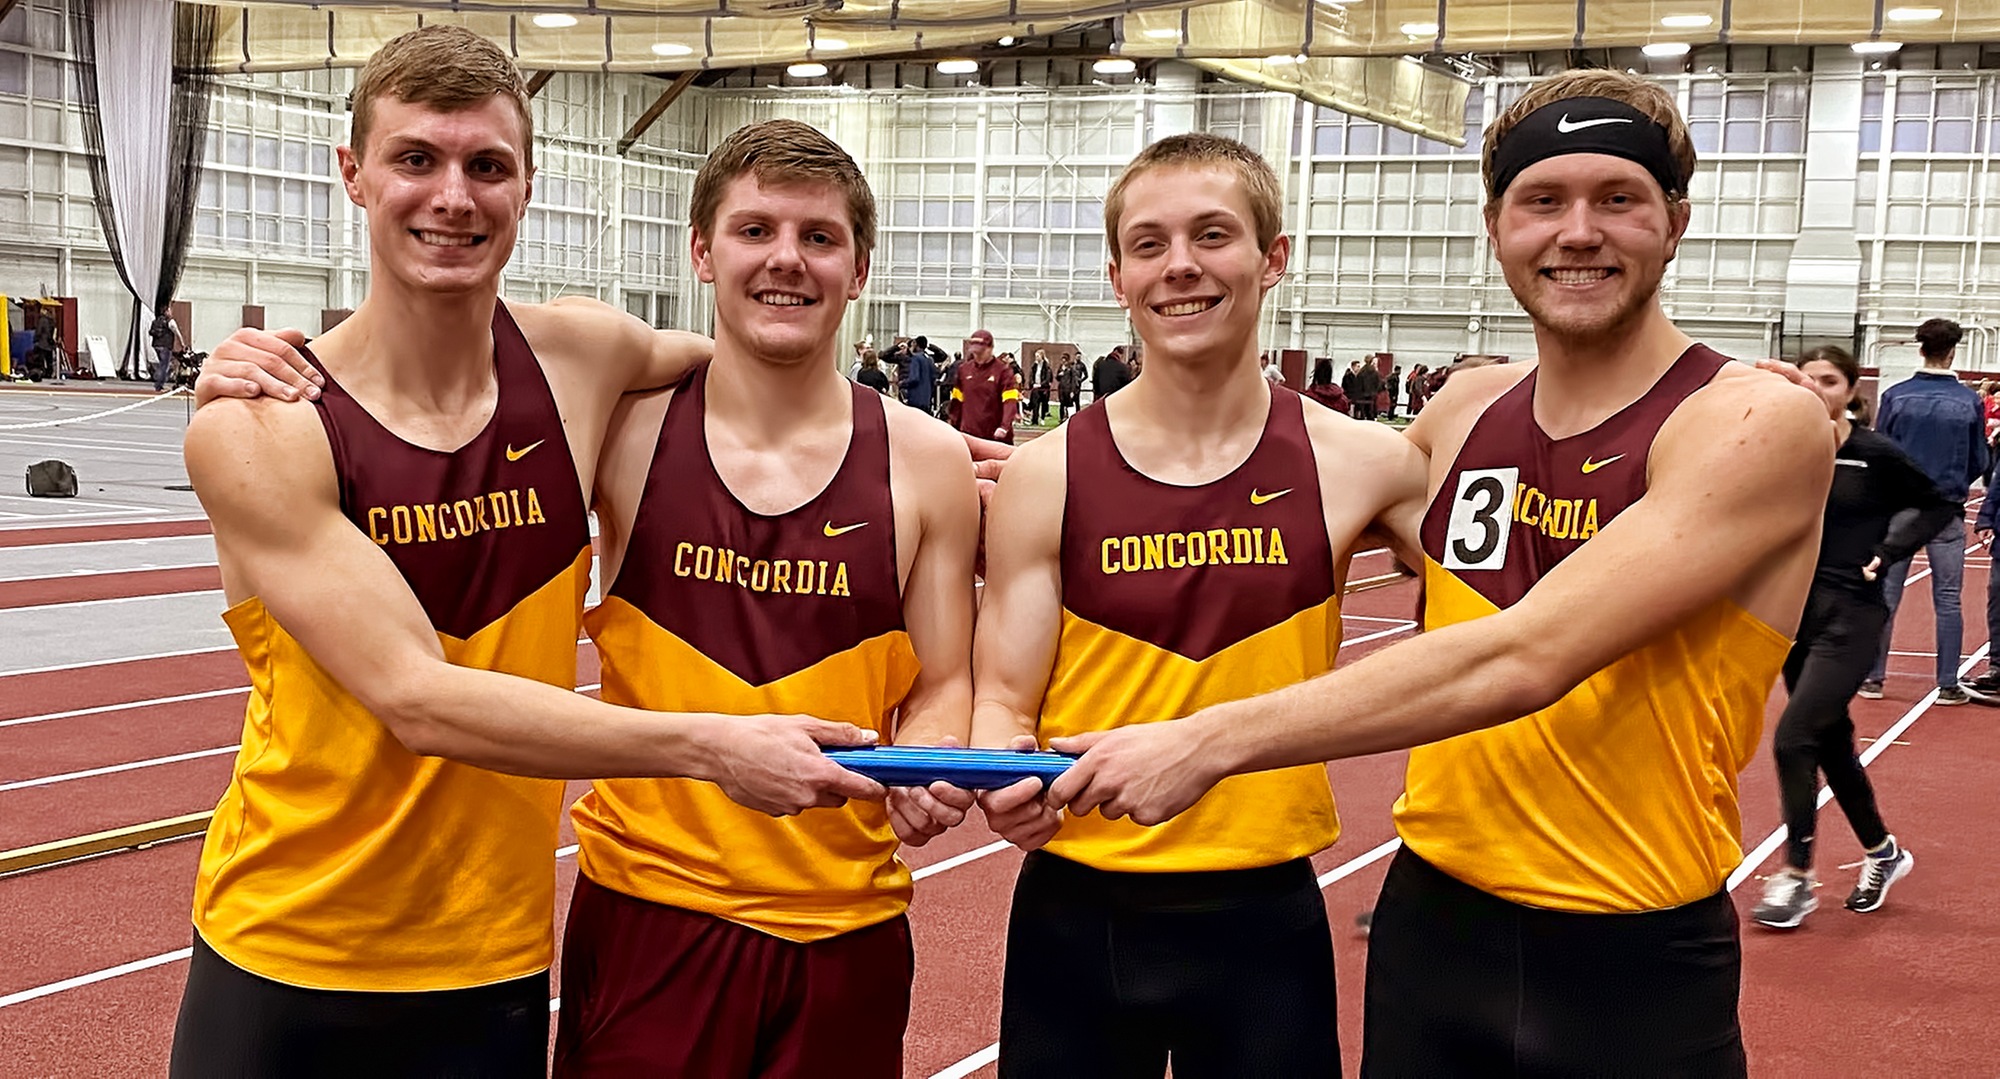 The 4x400-meter relay team of Cal Wright, Hayden Gagnon, Jesse Middendorf and Colin Schuller broke the school record at the U of Minnesota Cold Classic.